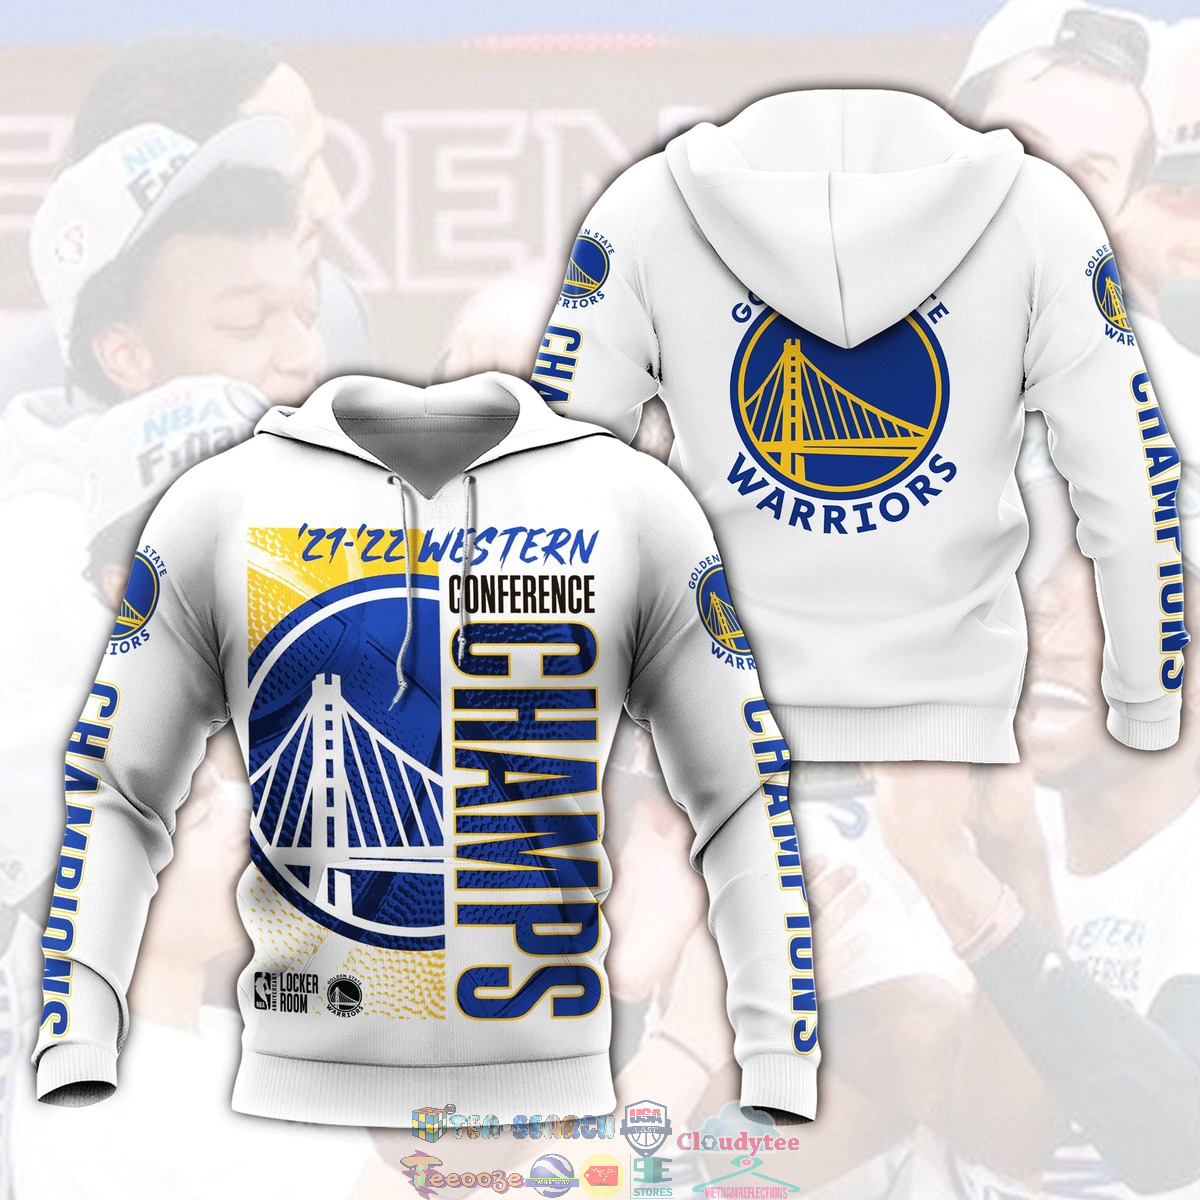 Golden State Warriors 21-22 Conference Champs White 3D hoodie and t-shirt – Saleoff